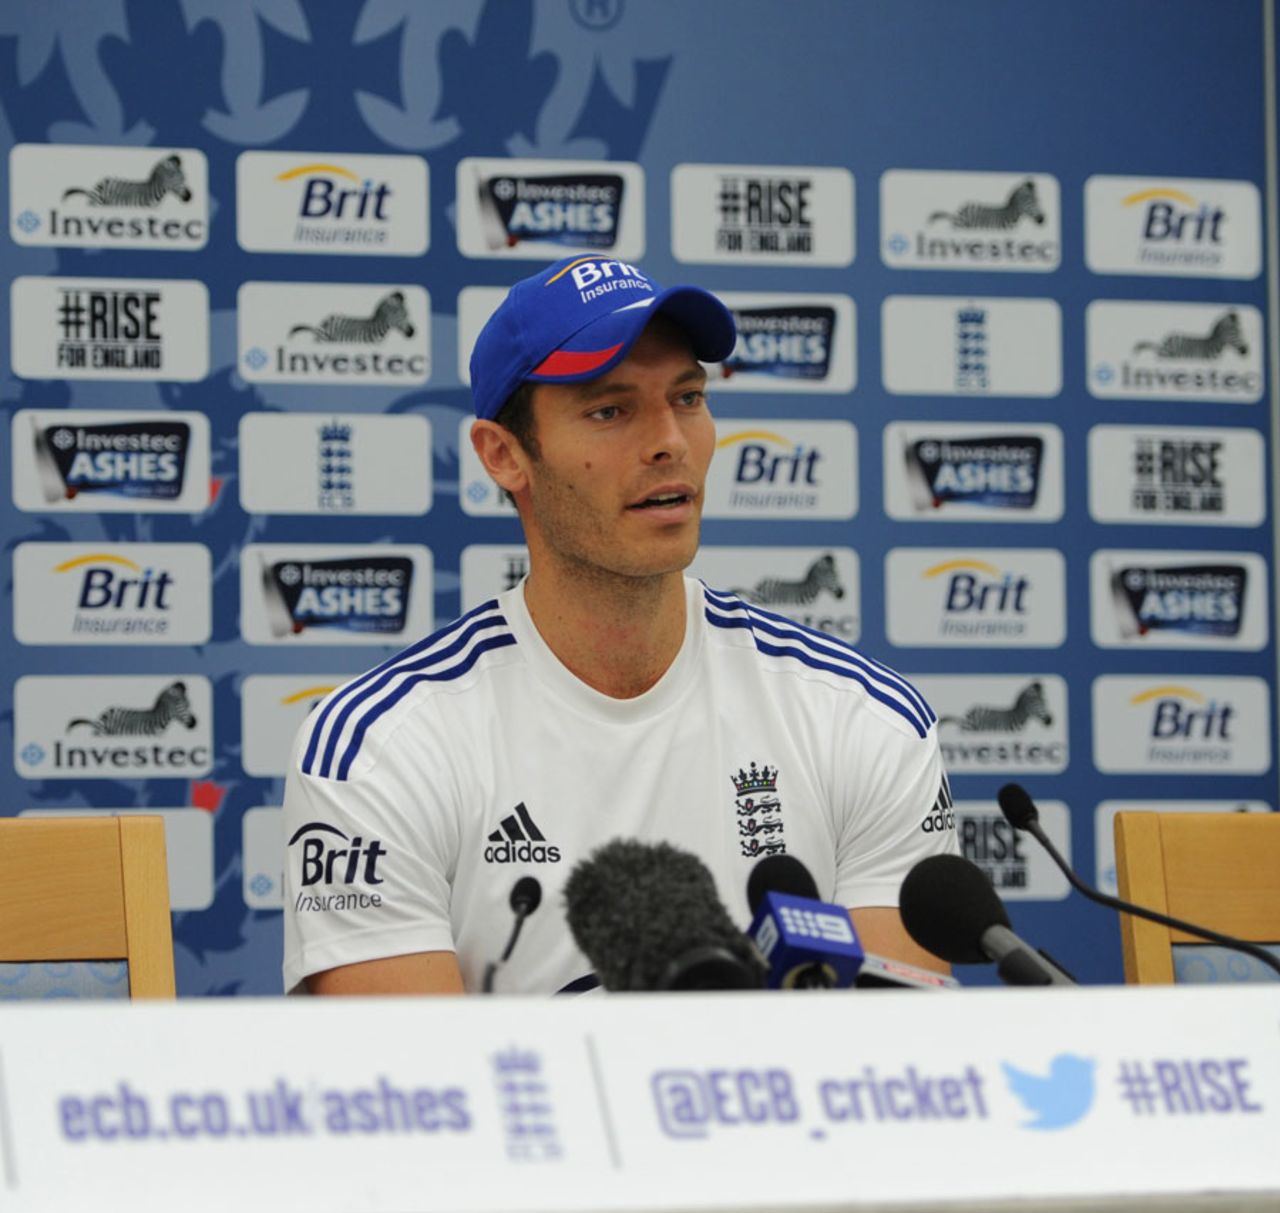 Chris Tremlett at a press conference, London, August 19, 2013